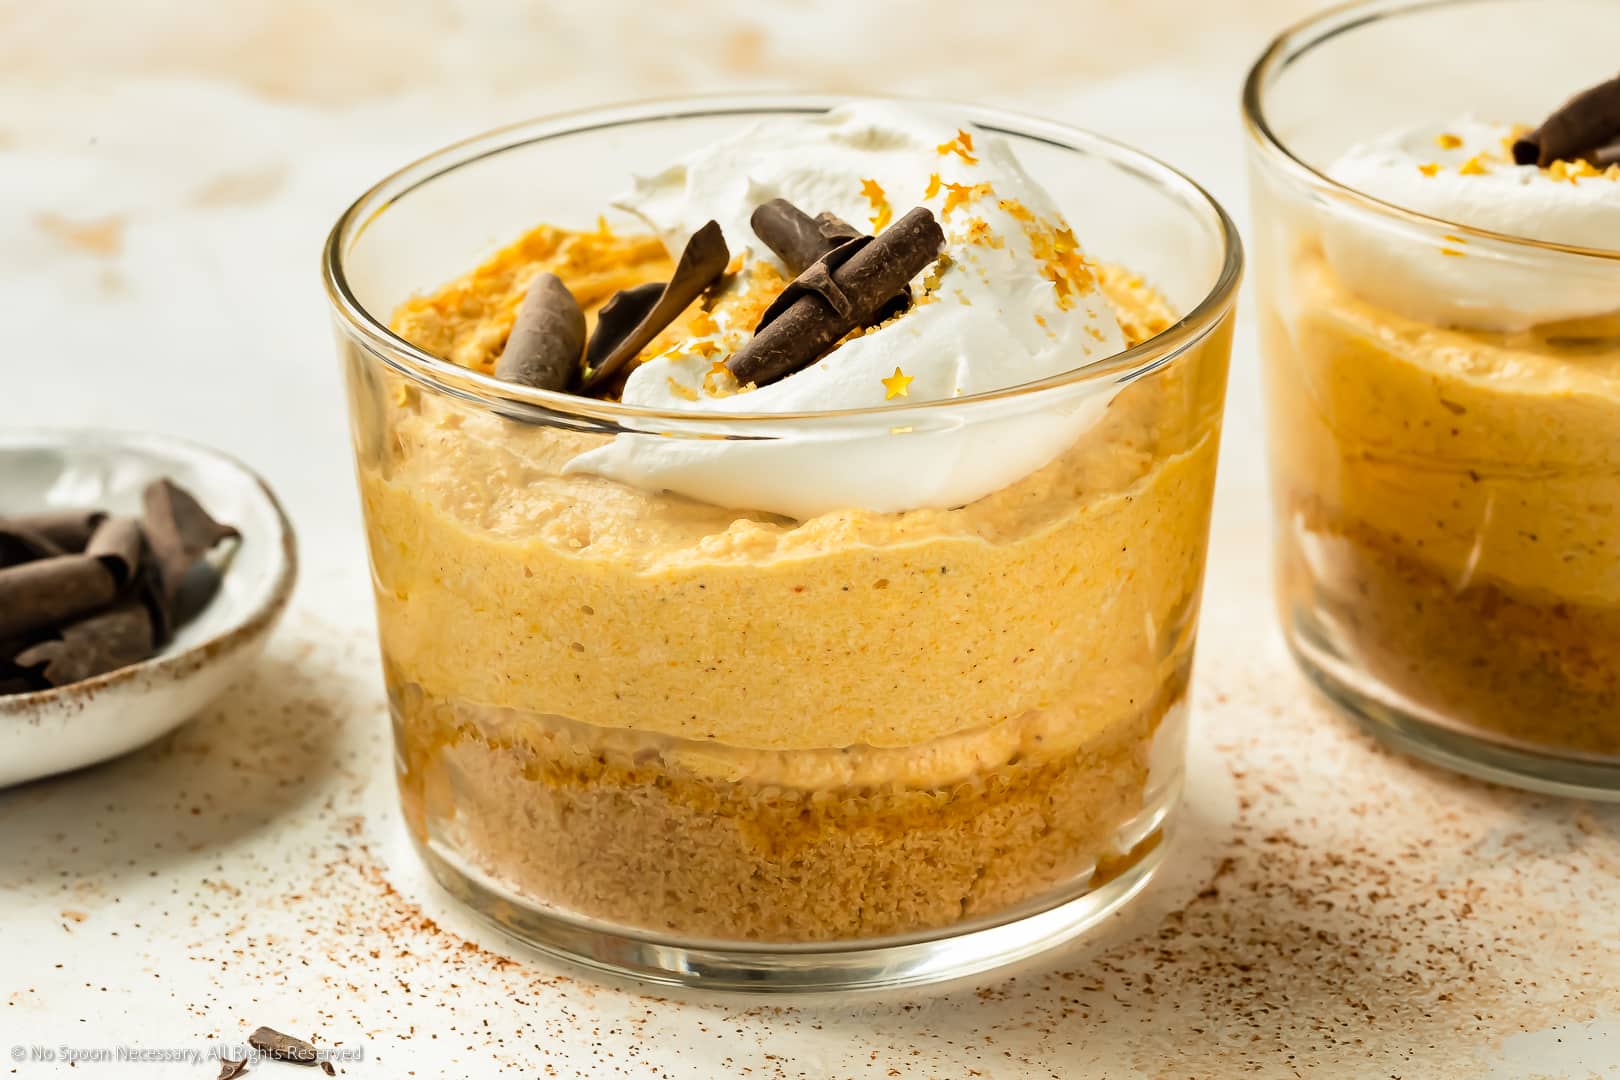 Landscape photo of pumpkin dessert topped with whipped cream, chocolate curls and gold flakes in a short dessert glass.